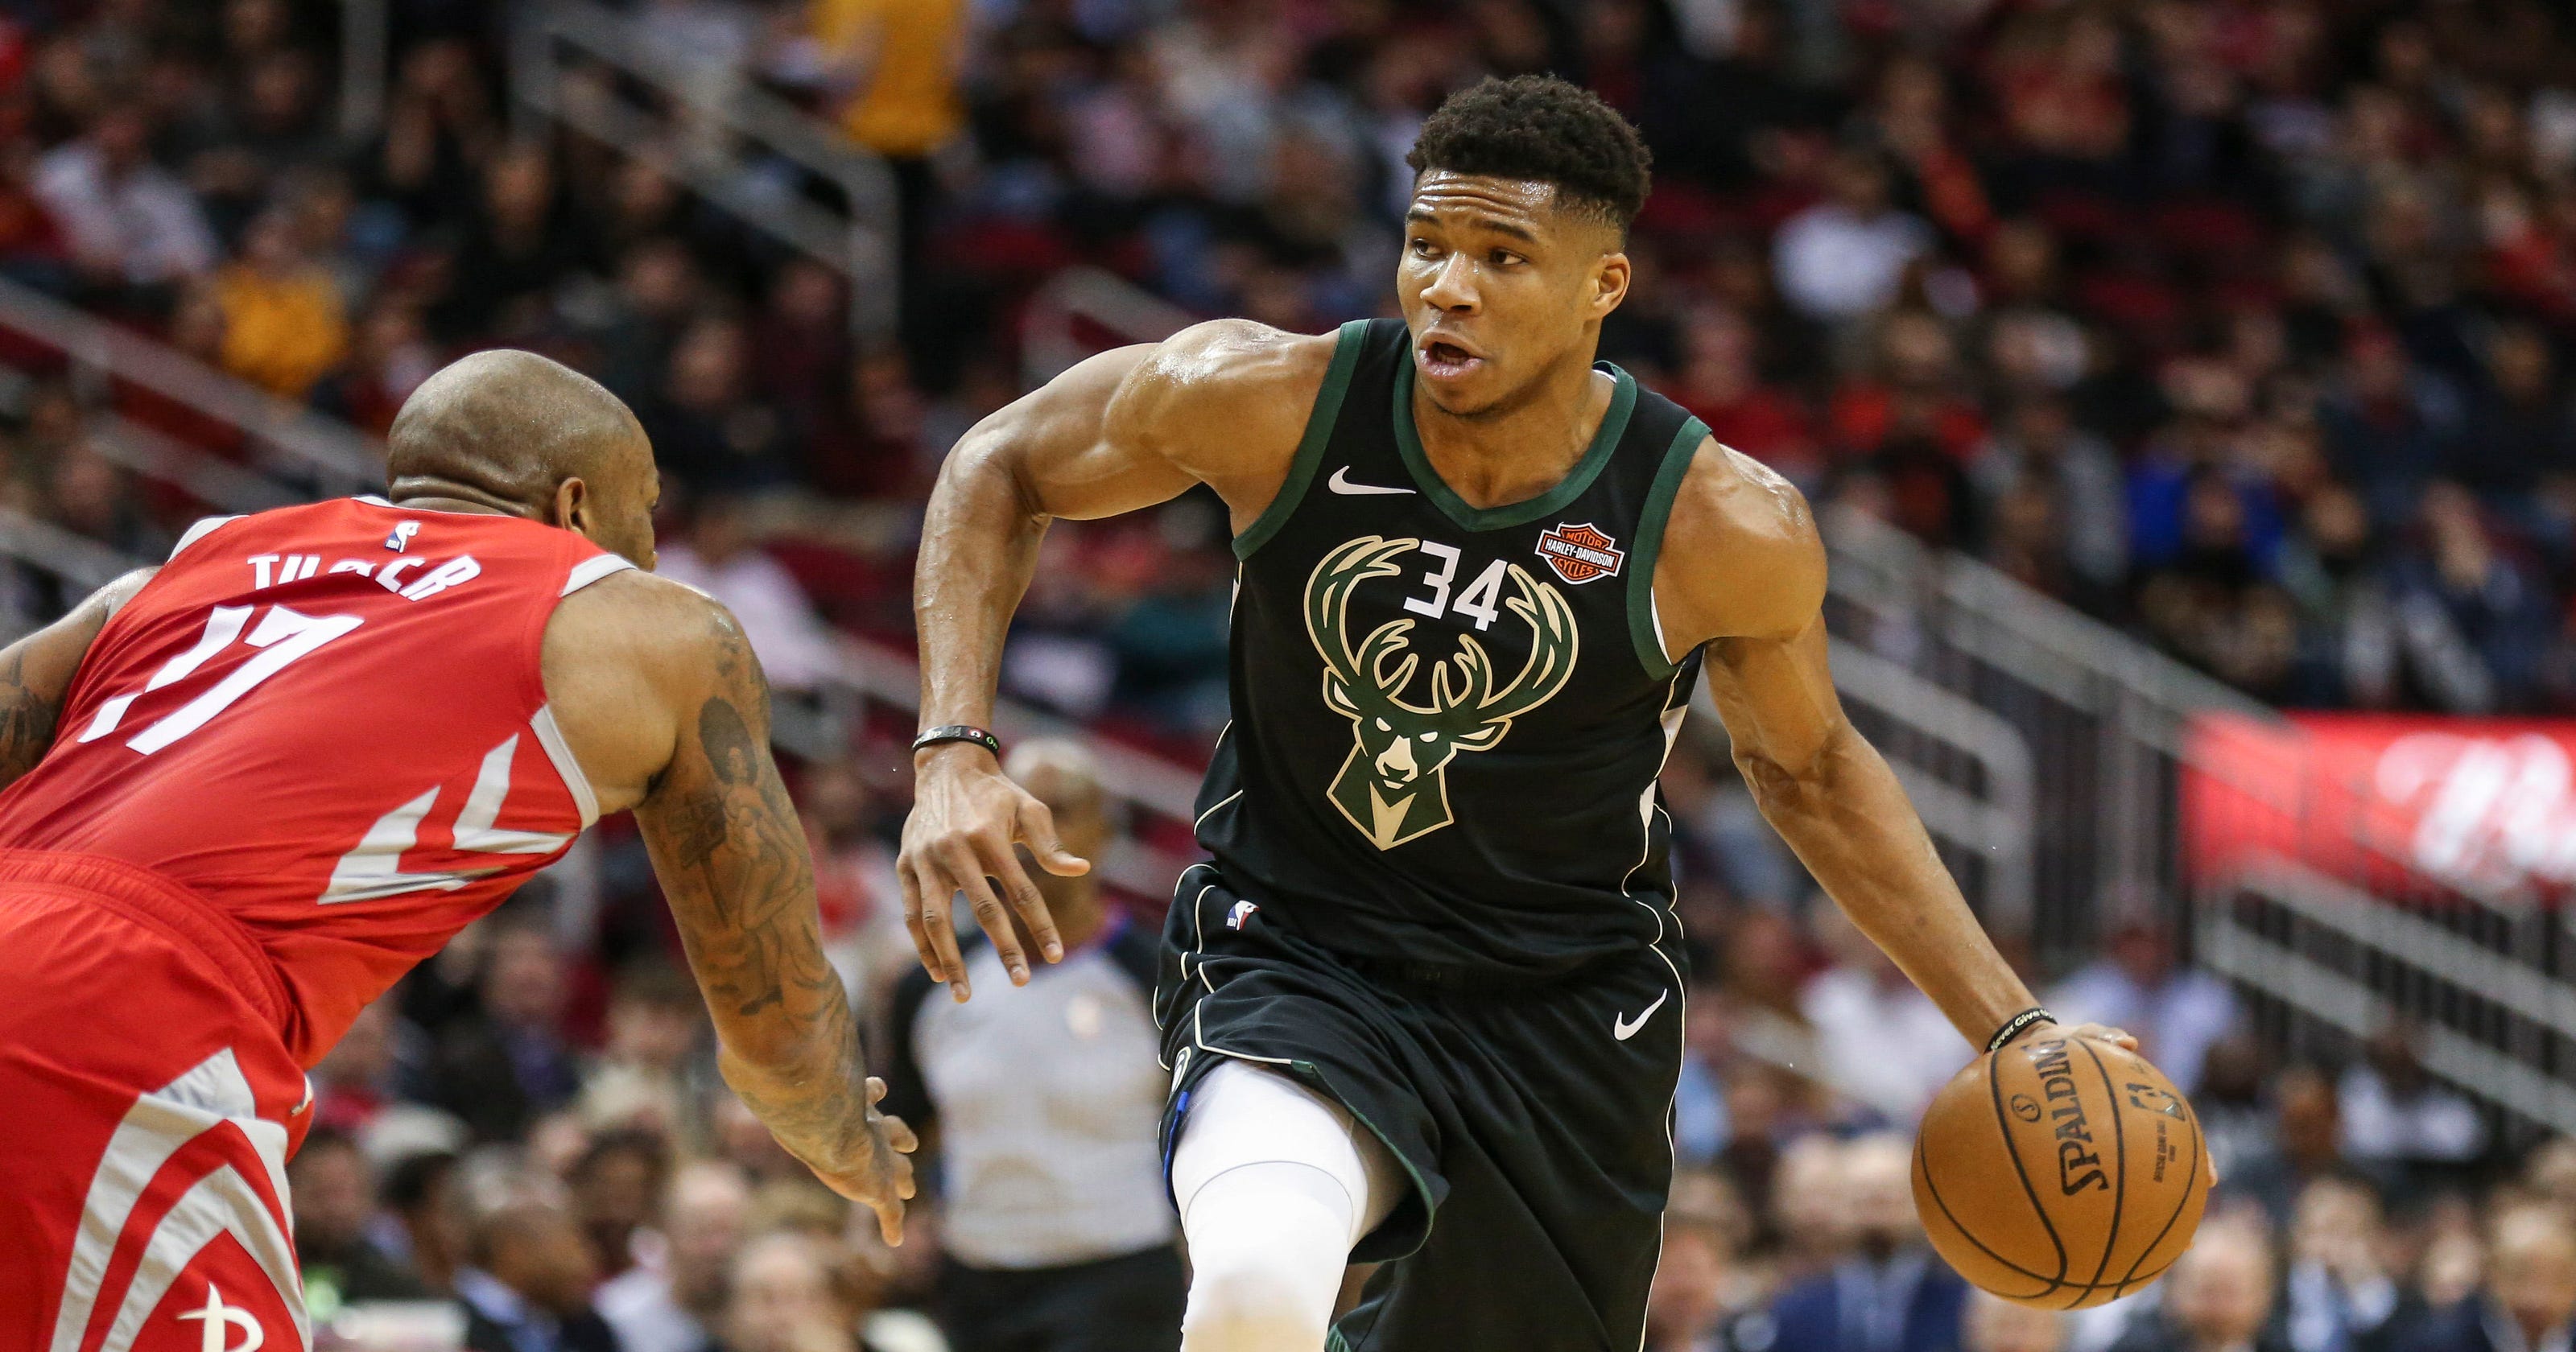 Giannis Antetokounmpo increases lead in Eastern all-star game voting